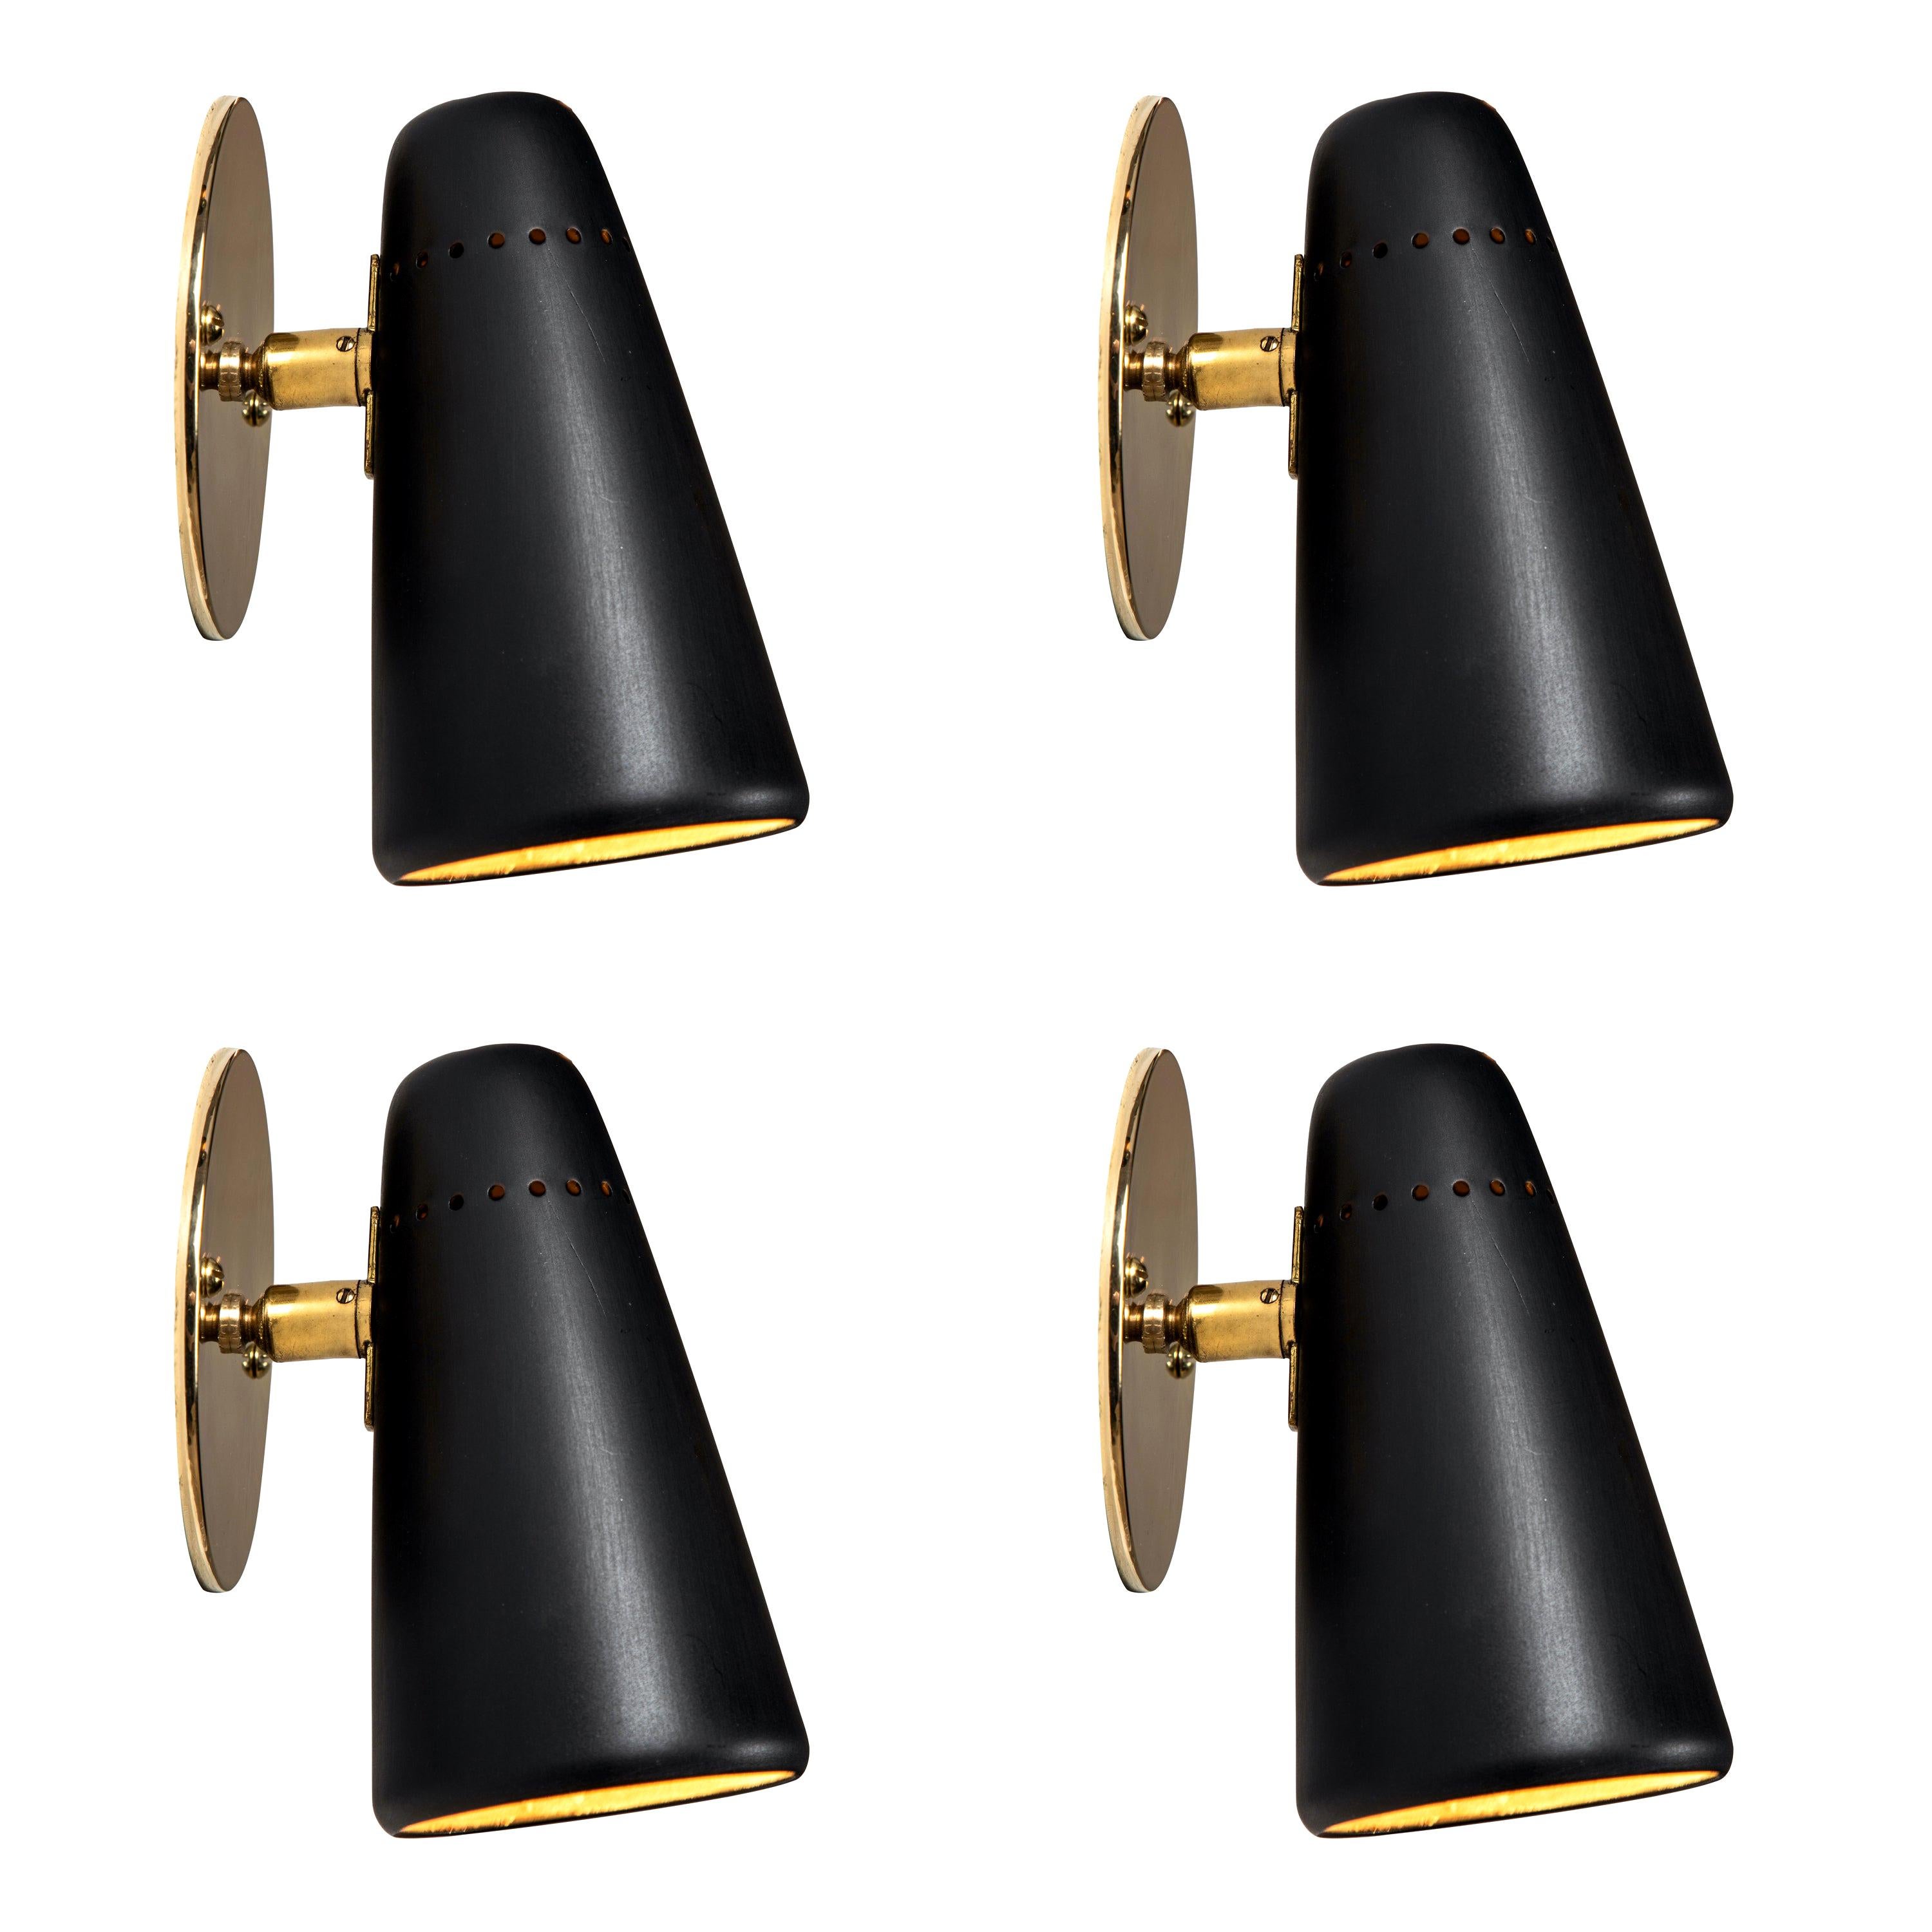 1950s Stilnovo Sconces in Black and Brass with Yellow Label